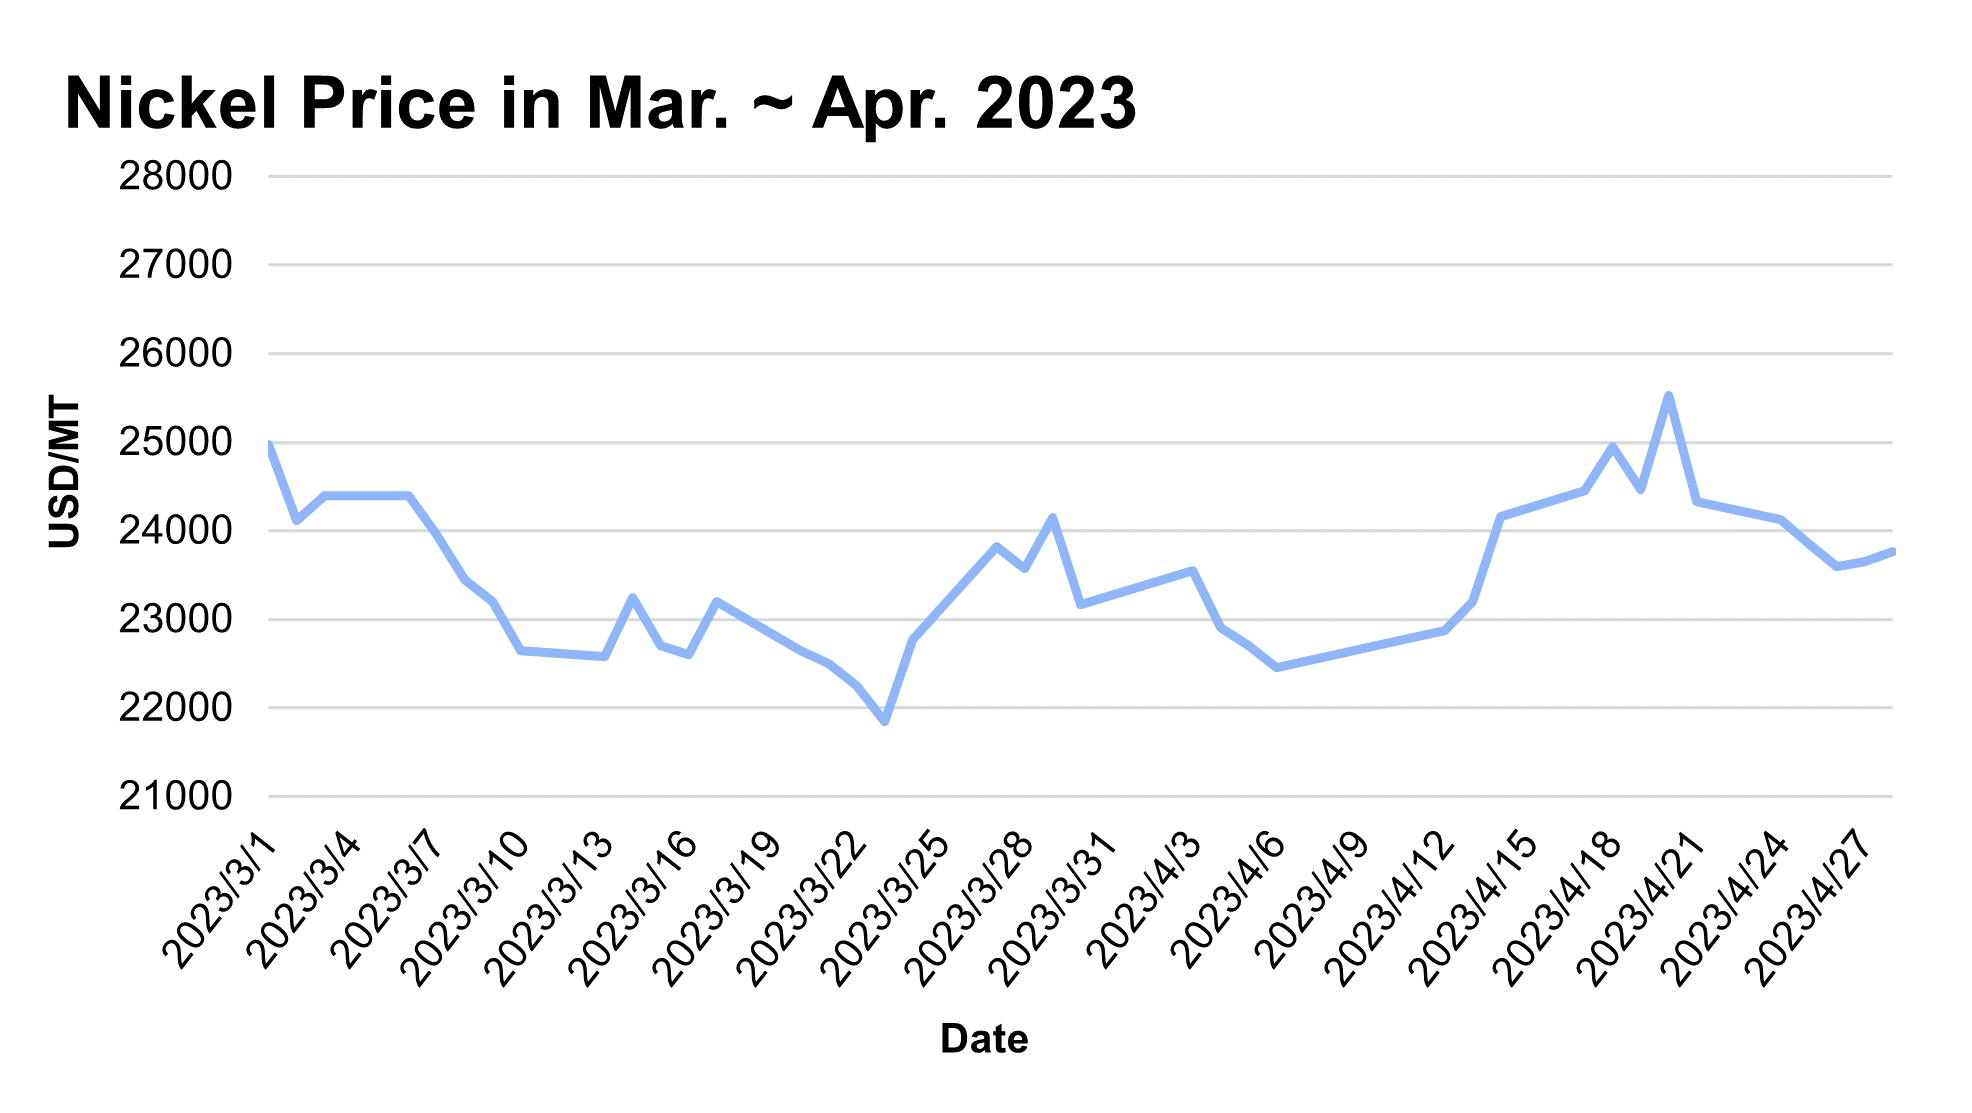 Nickel price in March and April 2023